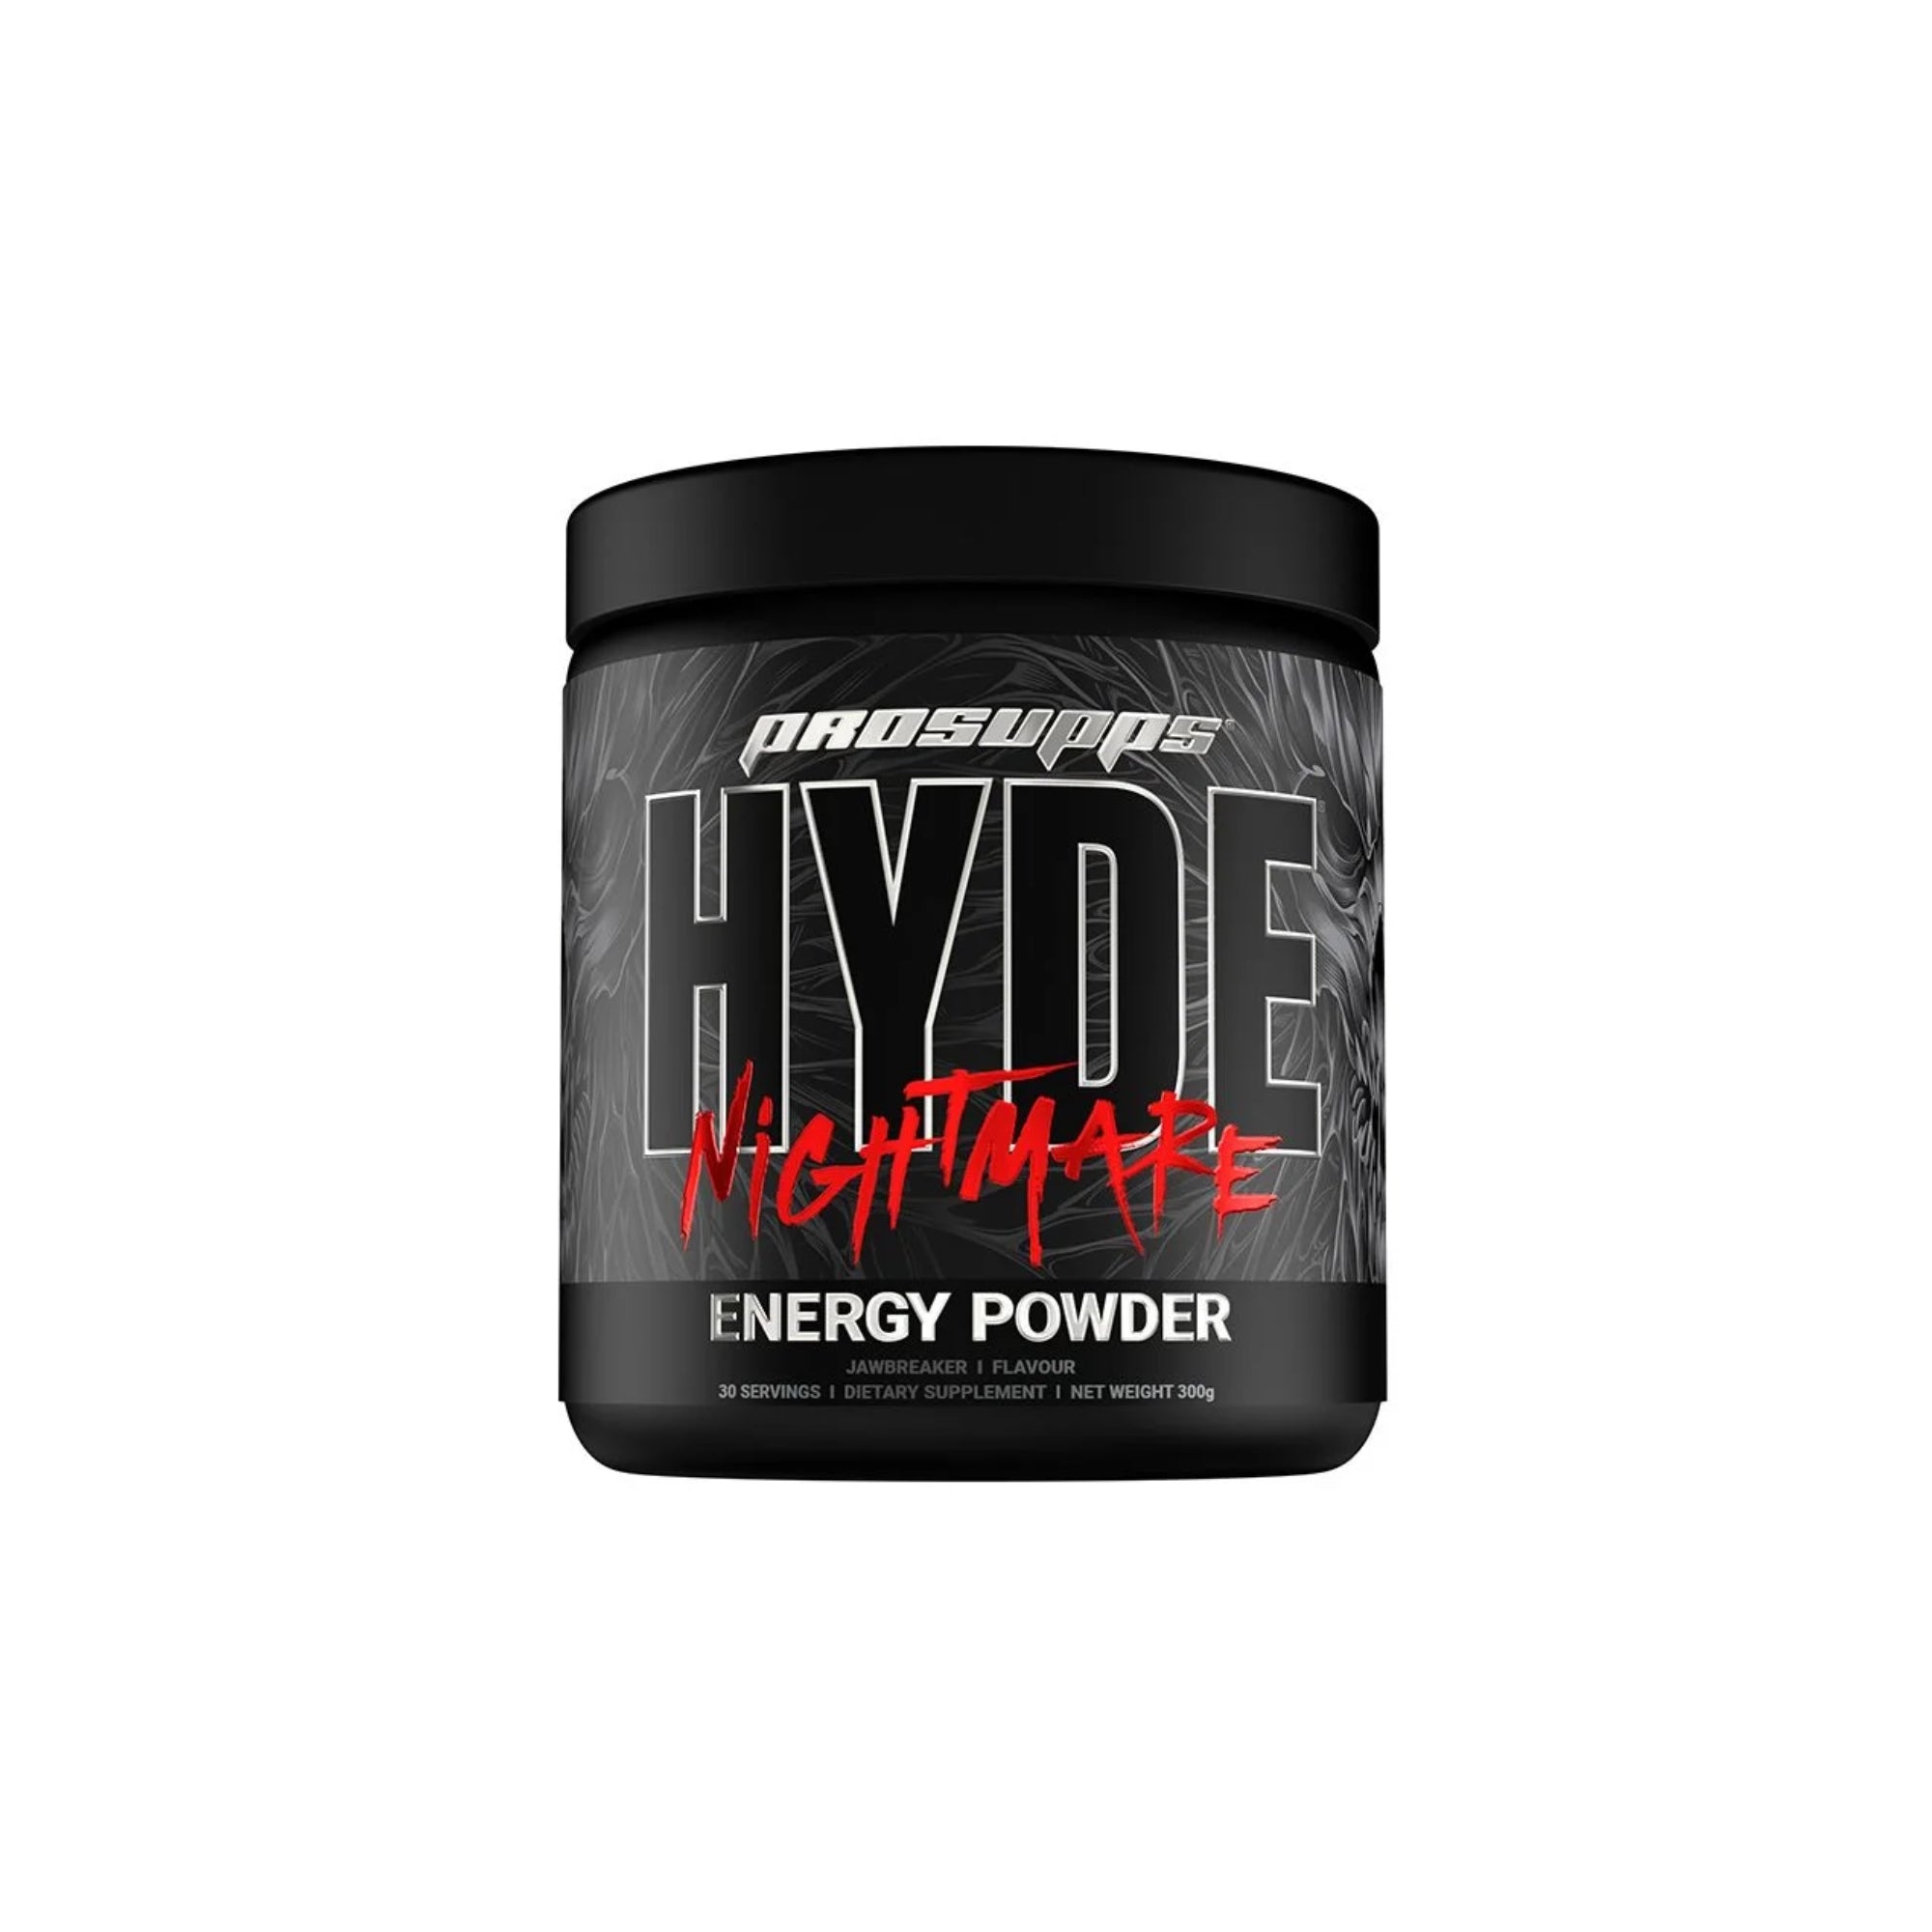 Pro Supp Hyde Nightmare Pre Workout